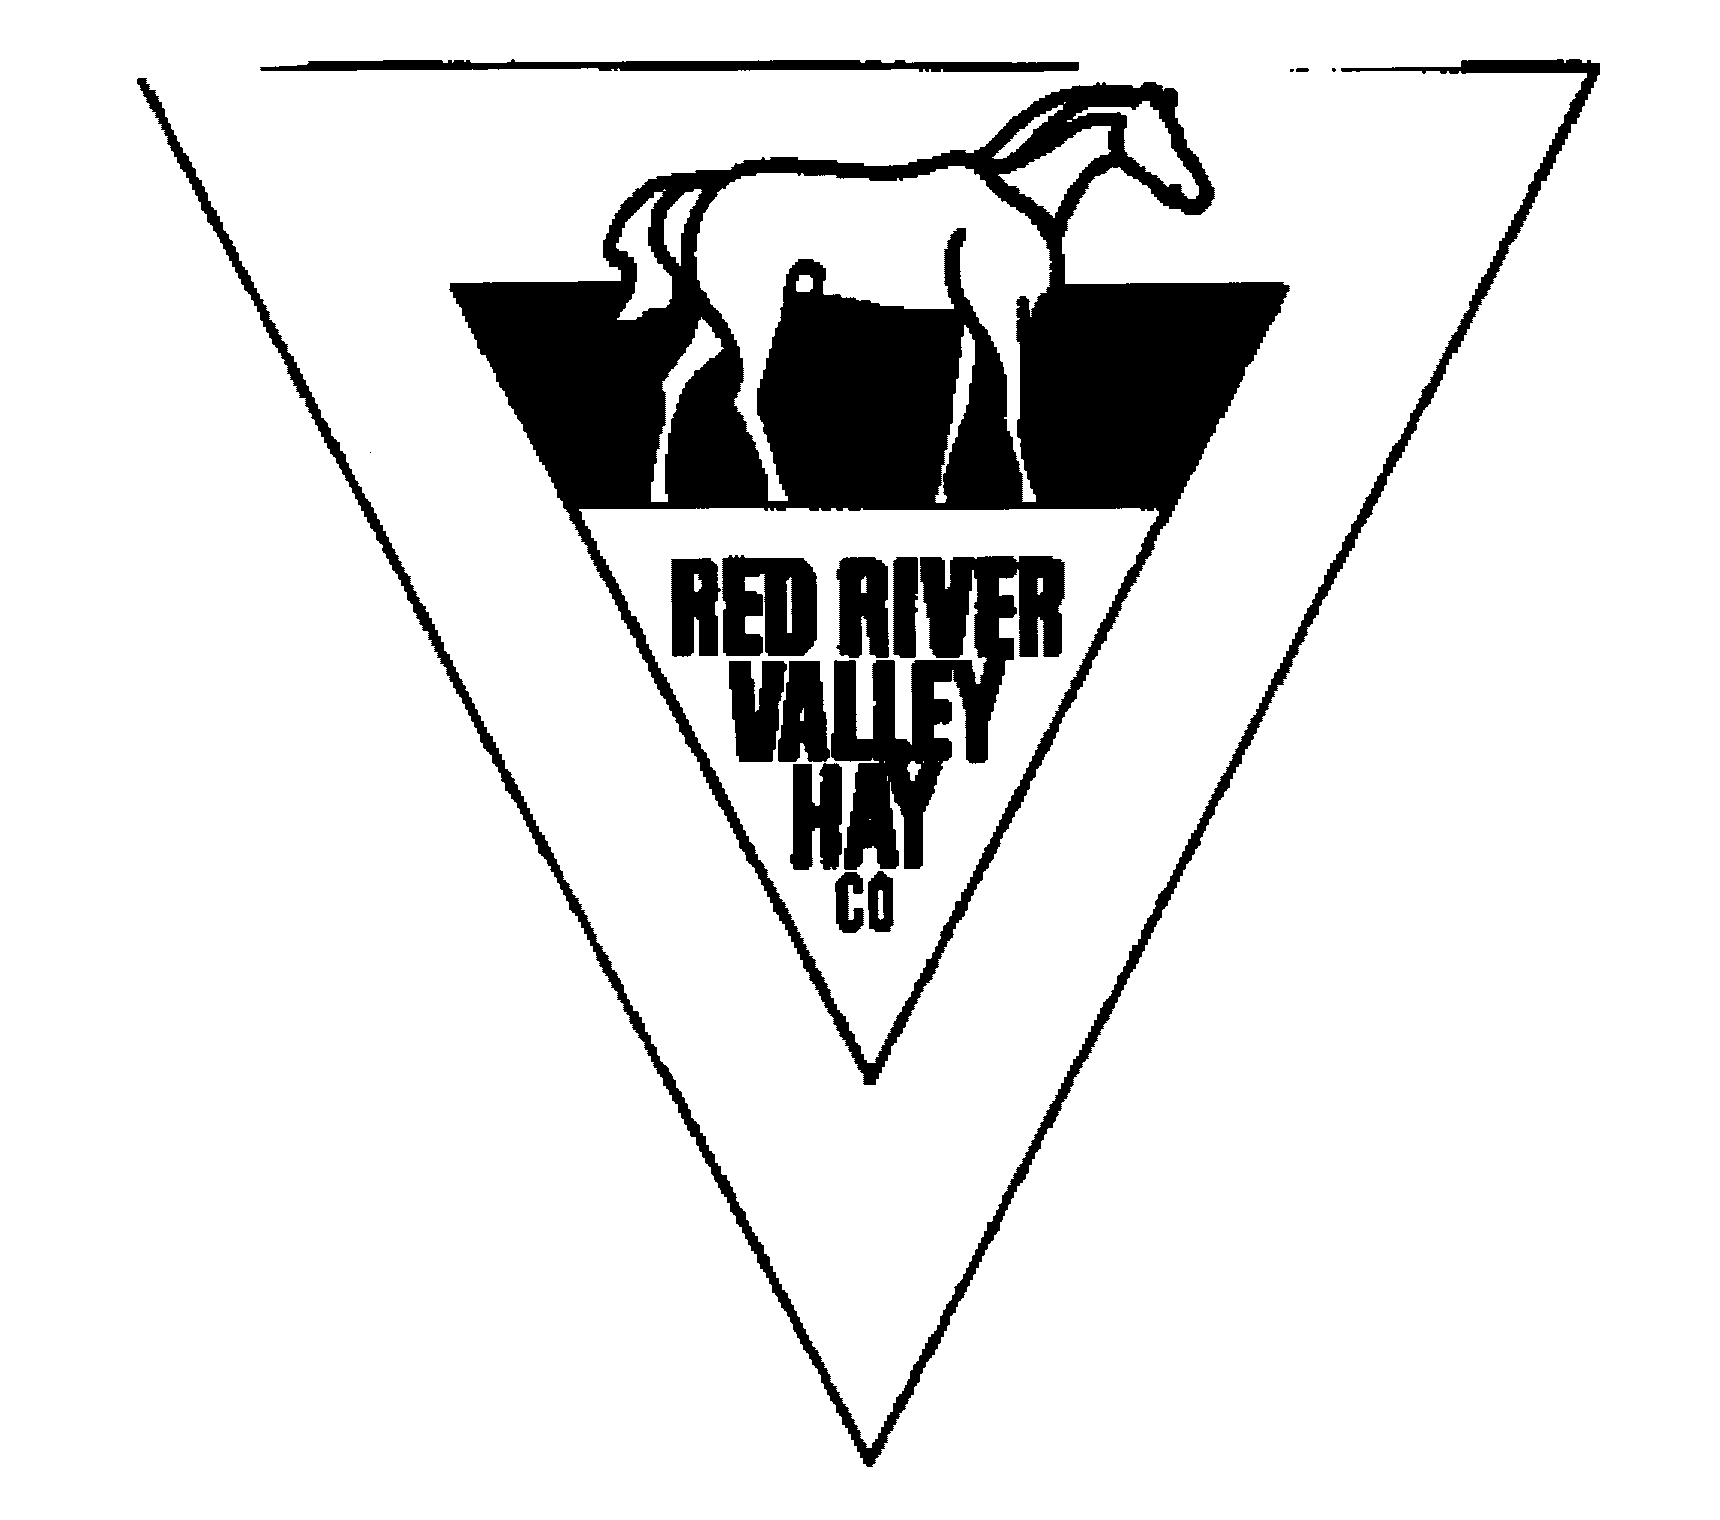  RED RIVER VALLEY HAY CO.